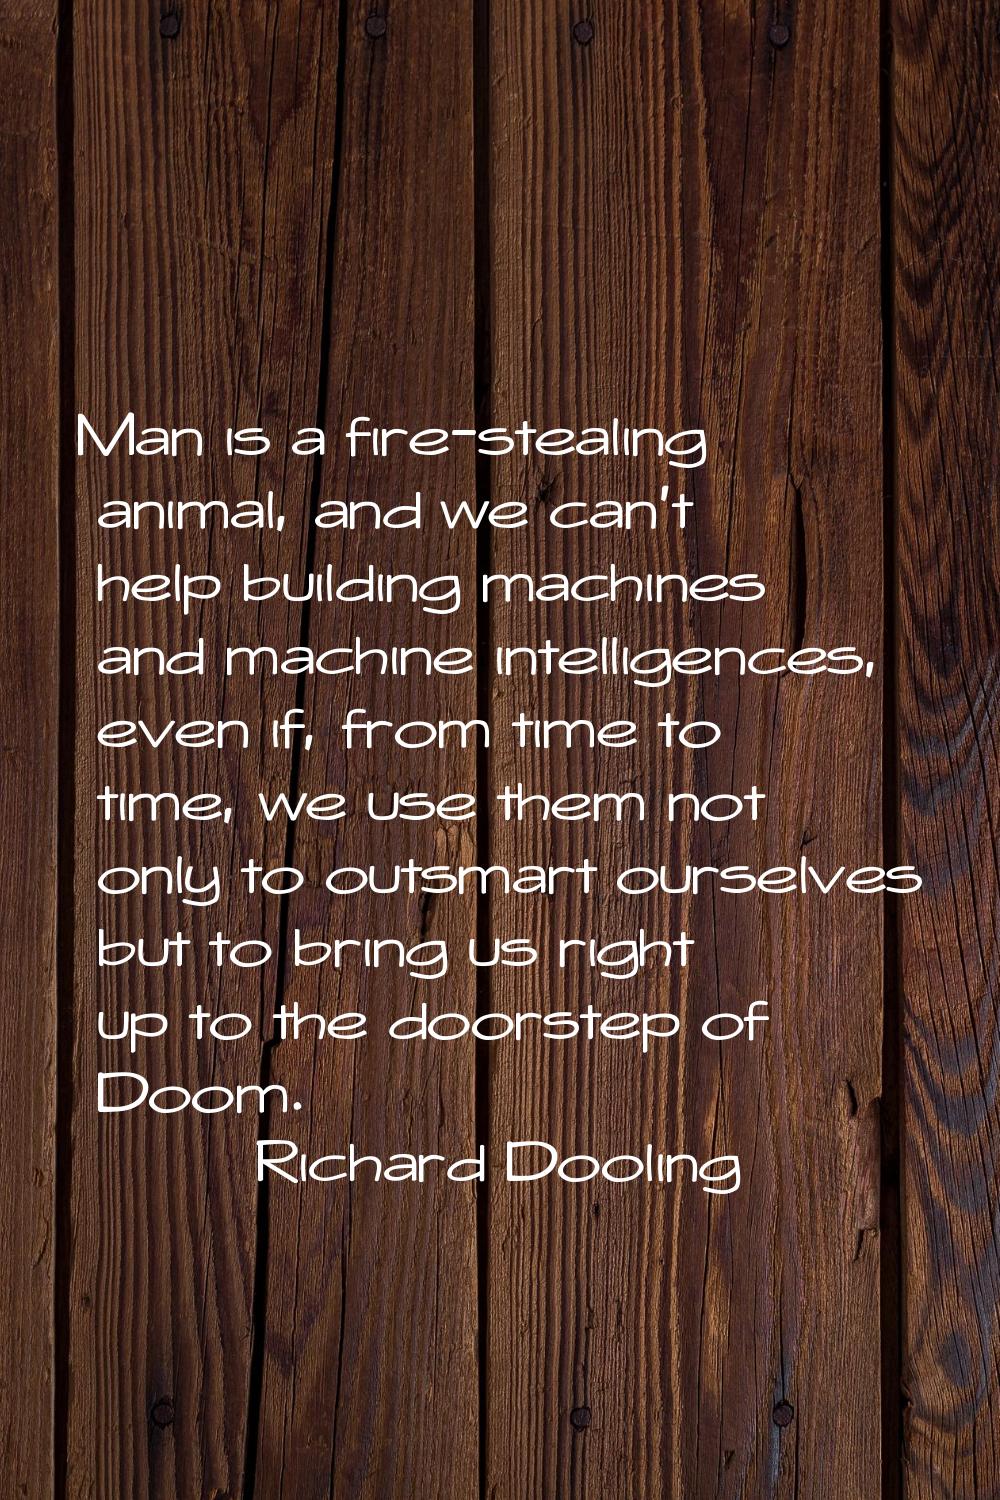 Man is a fire-stealing animal, and we can't help building machines and machine intelligences, even 